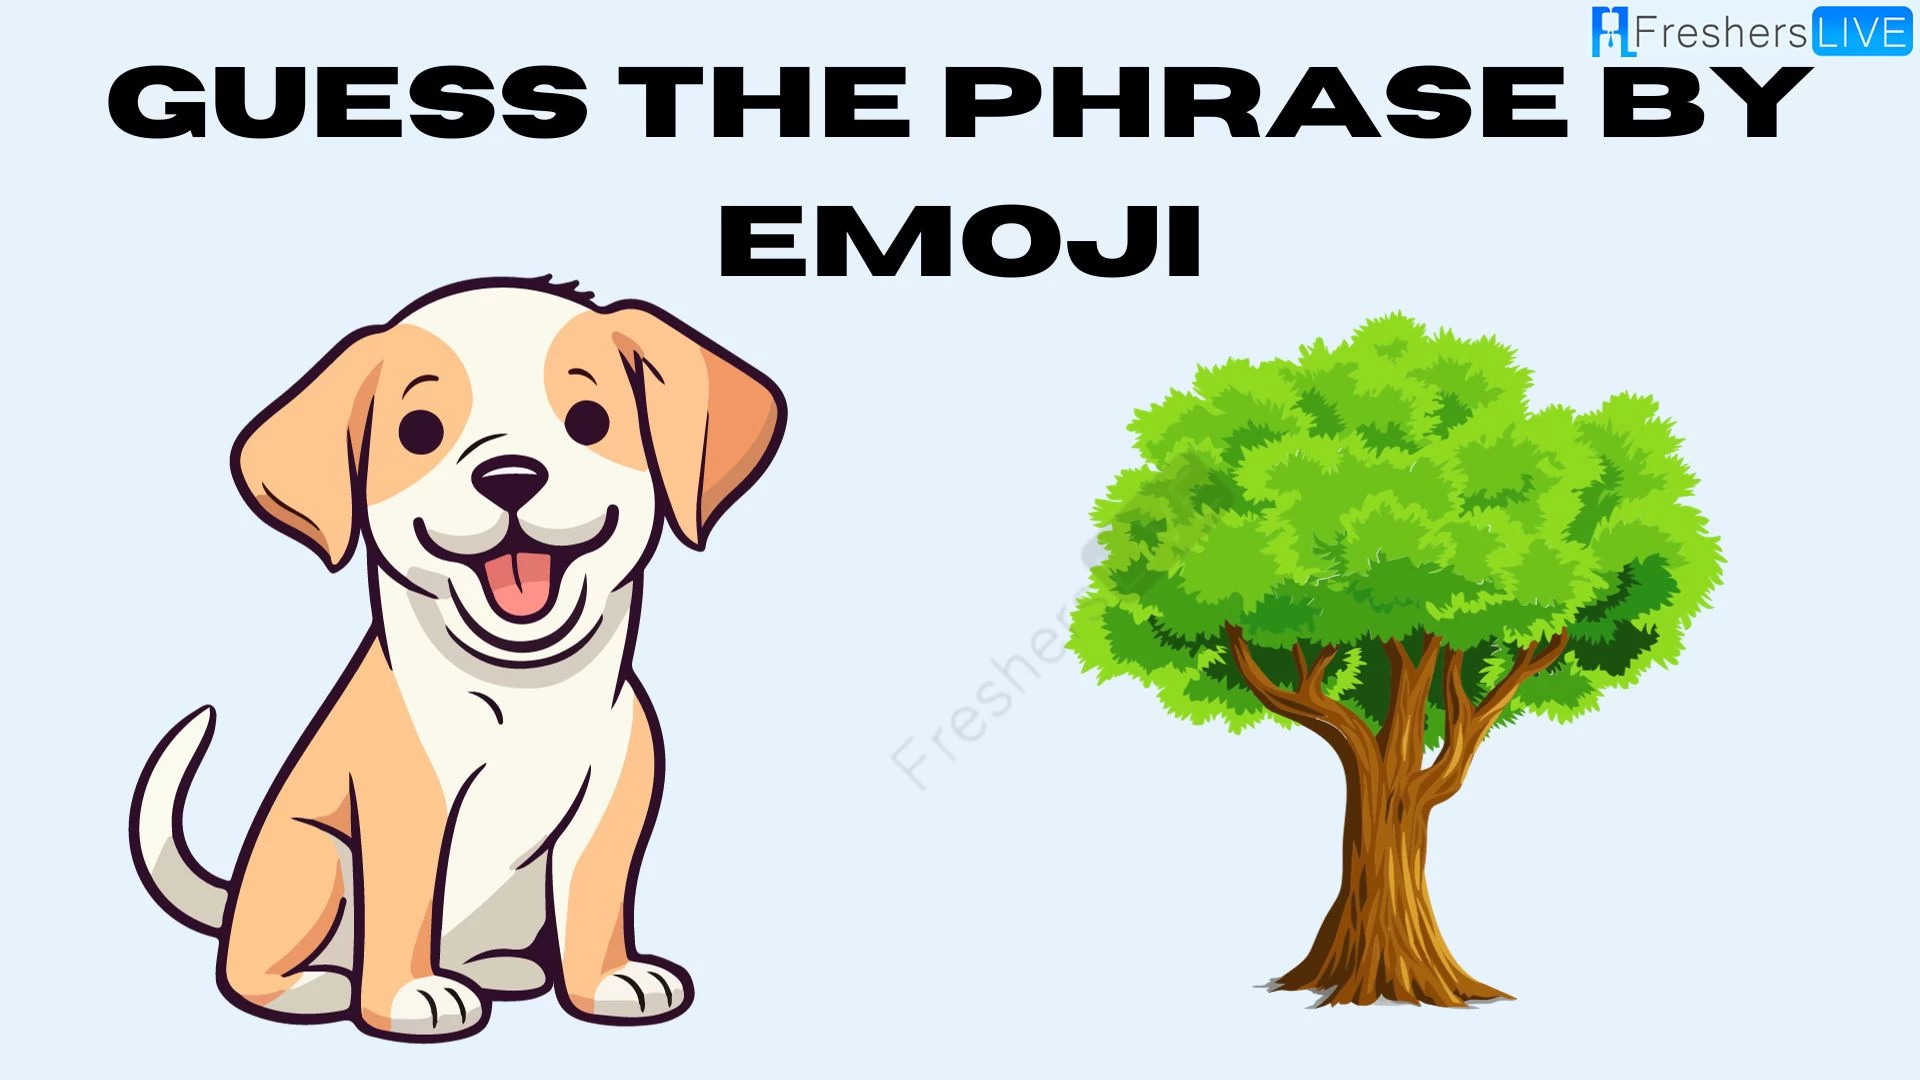 Only Genius Can Guess the Phrase by Emoji